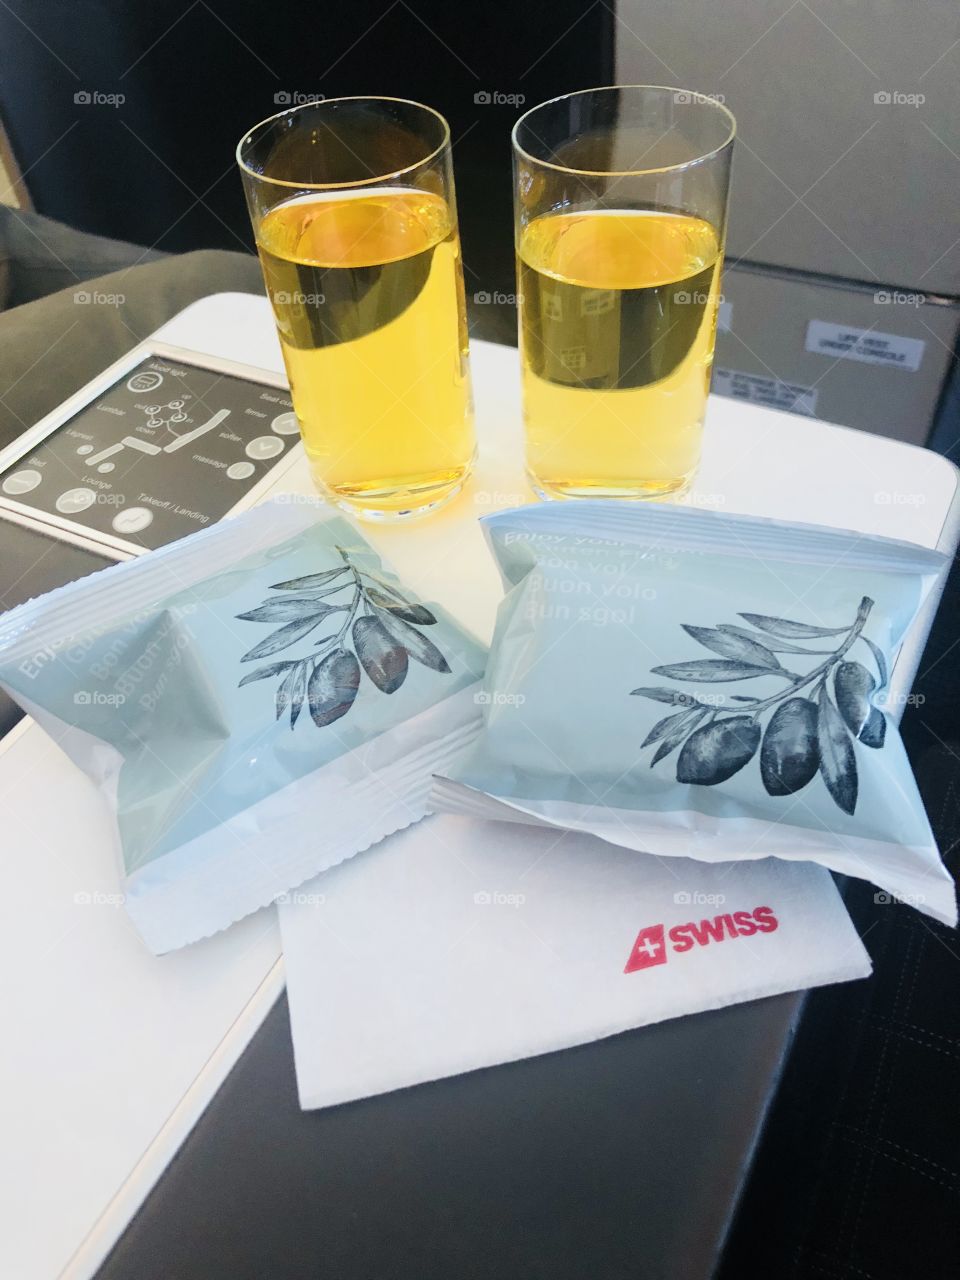 Swiss airlines business class